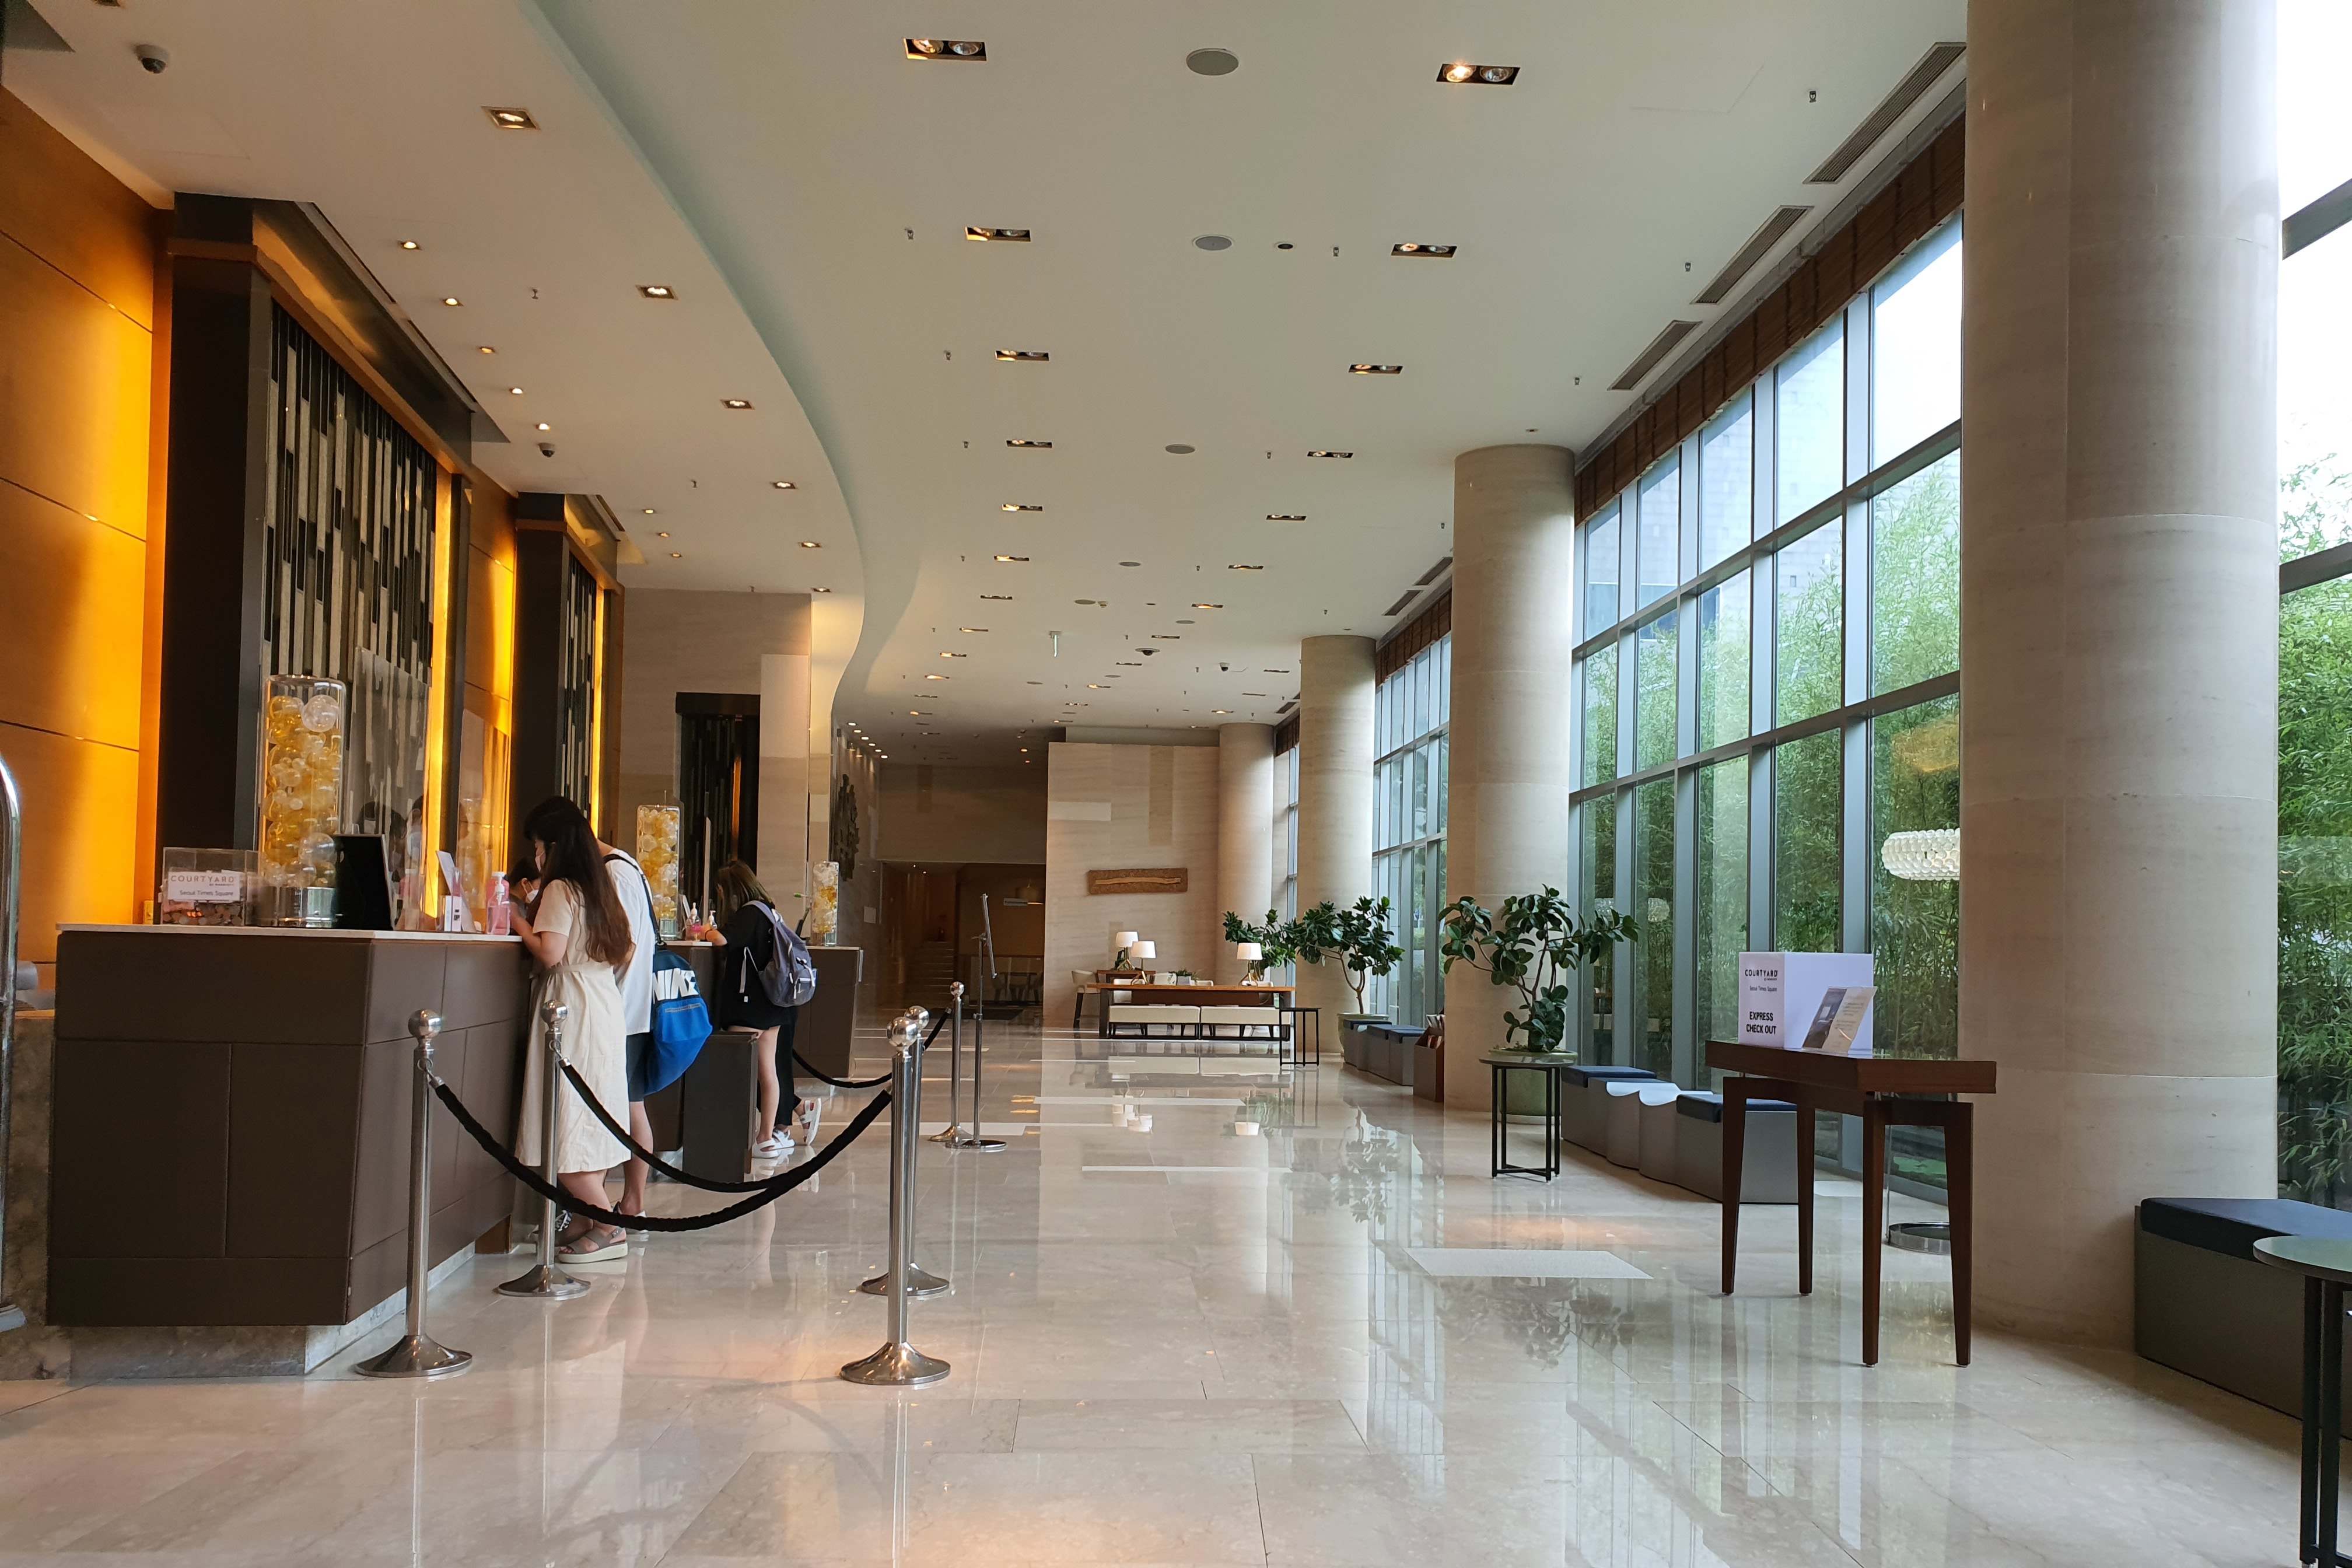 Entryway/Main entrance0 : Hotel lobby with high ceilings and wide aisles